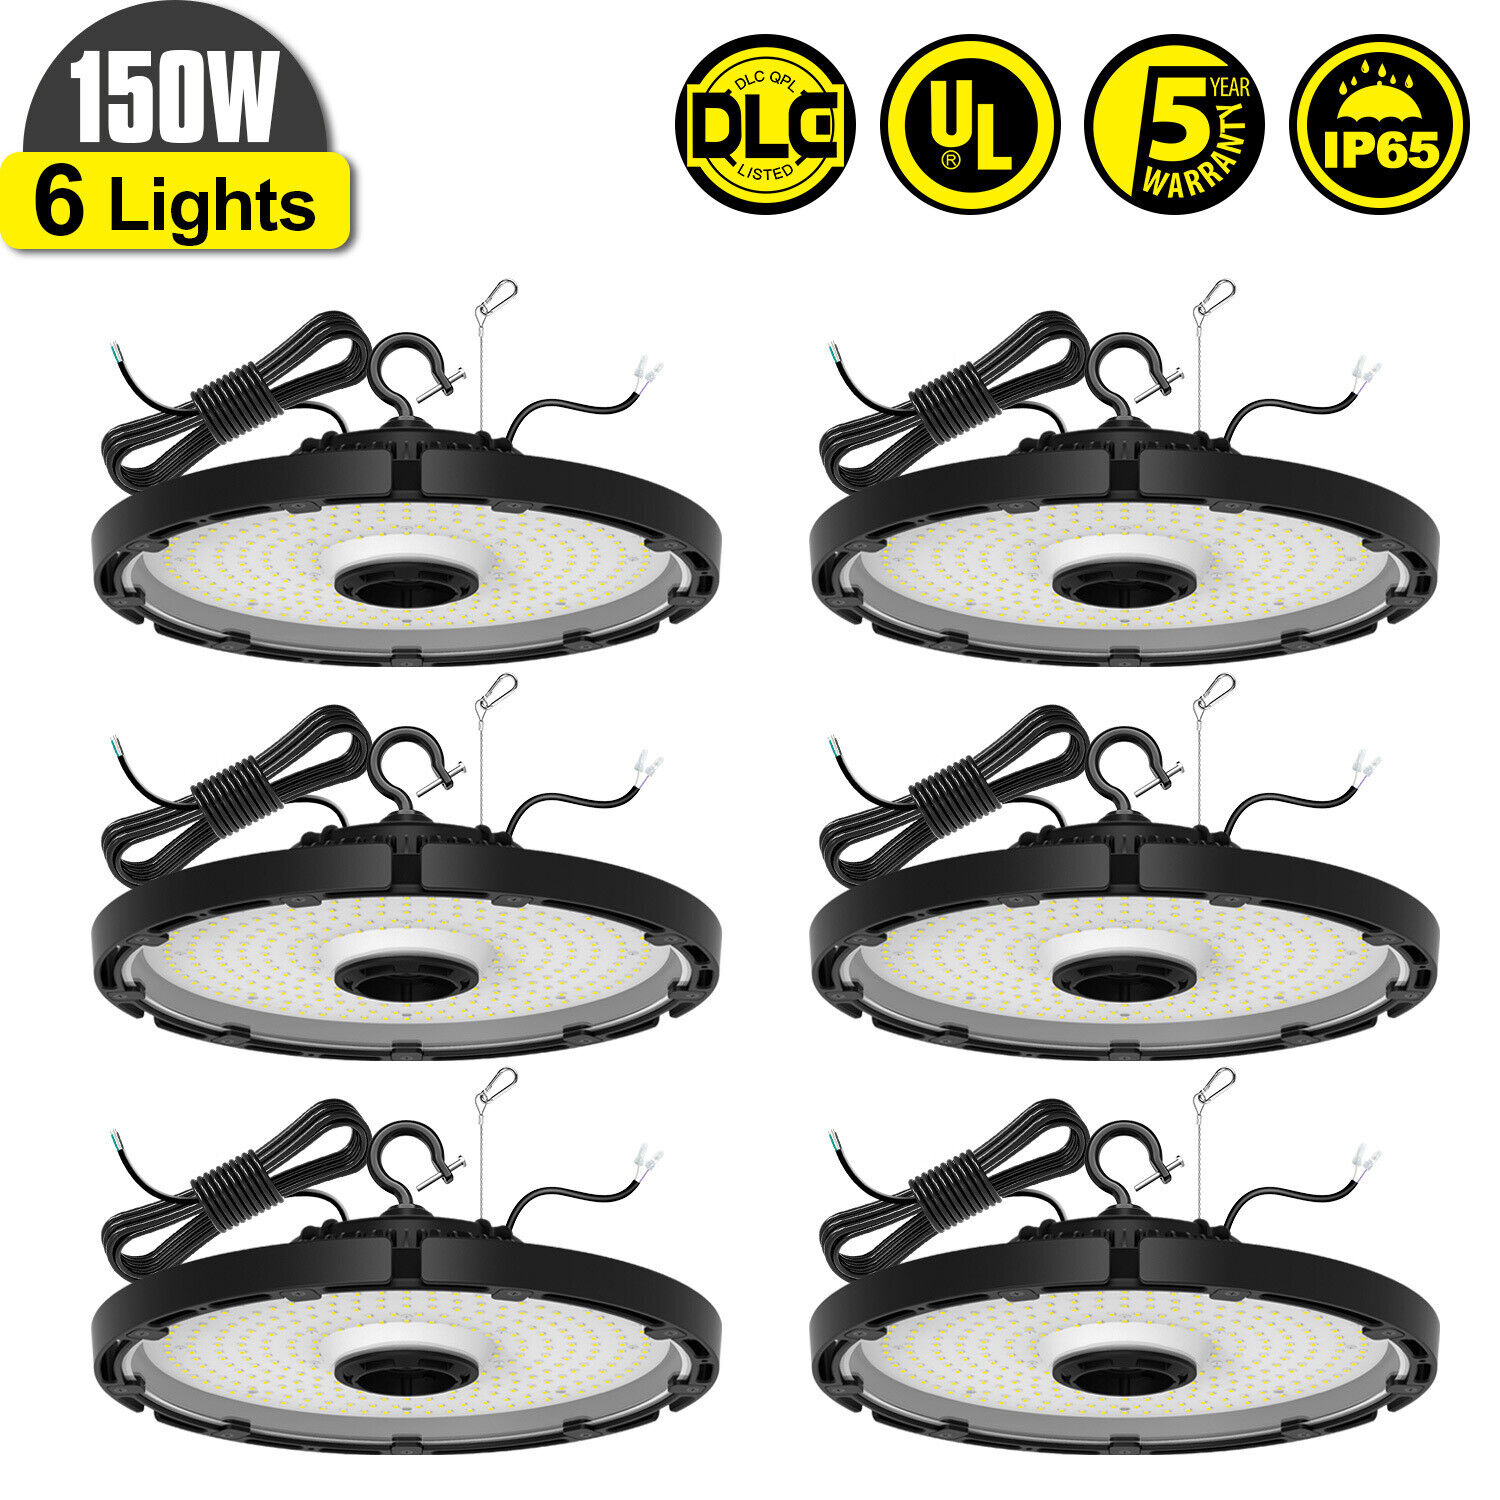 6X 150W Led High Bay Light Commercial Warehouse Shop Lighting Fixtures 21,000lm